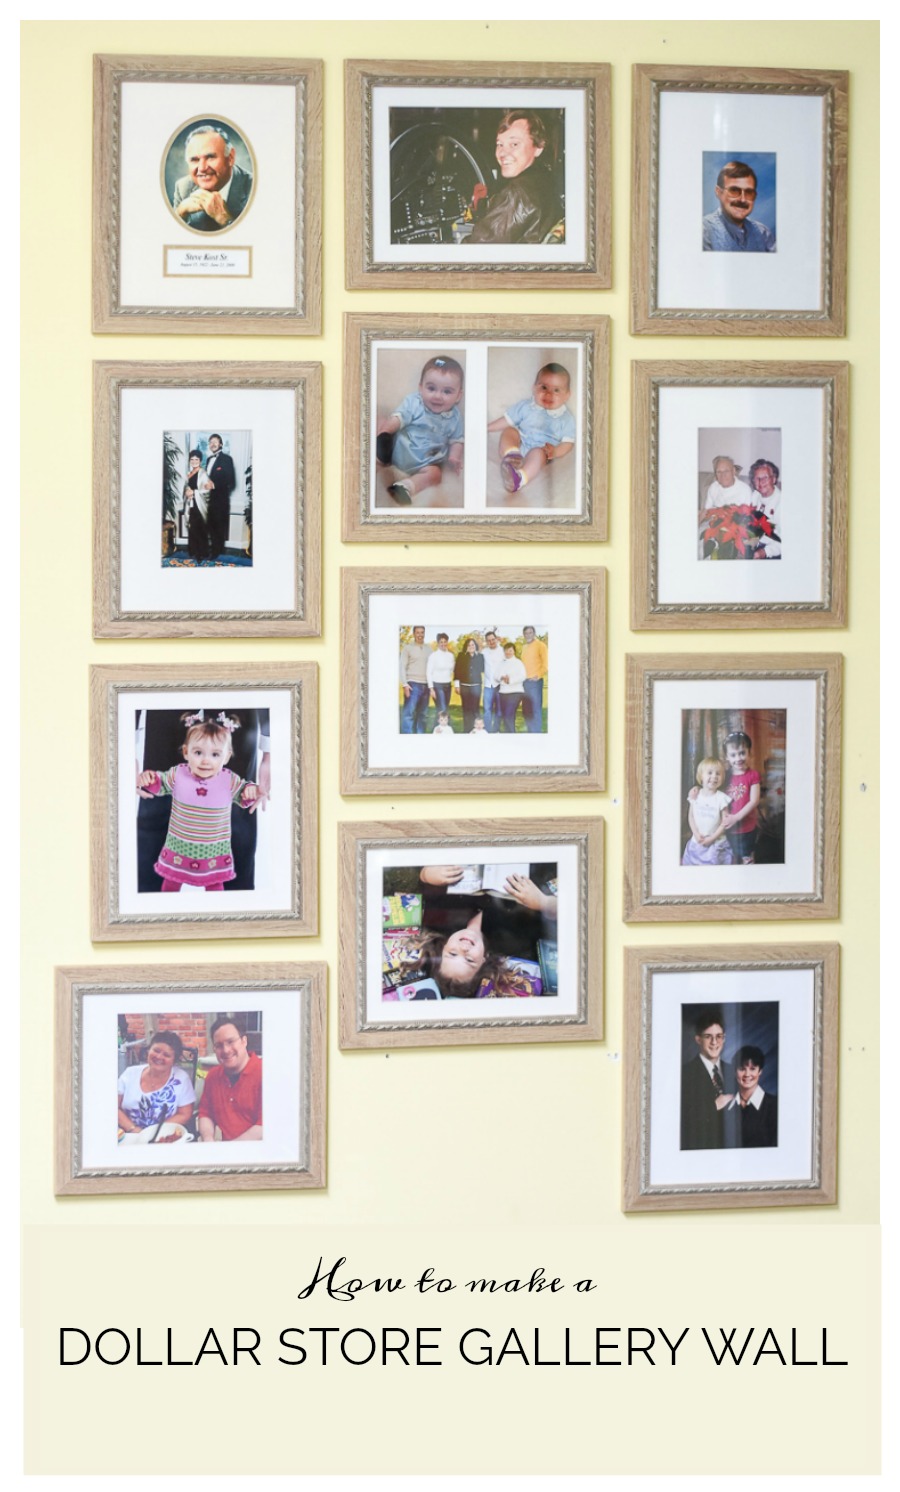 How to cut your own picture mats, cut your own photo mats, Dollar store gallery wall, inexpensive gallery wall, how to make a gallery wall on a budget